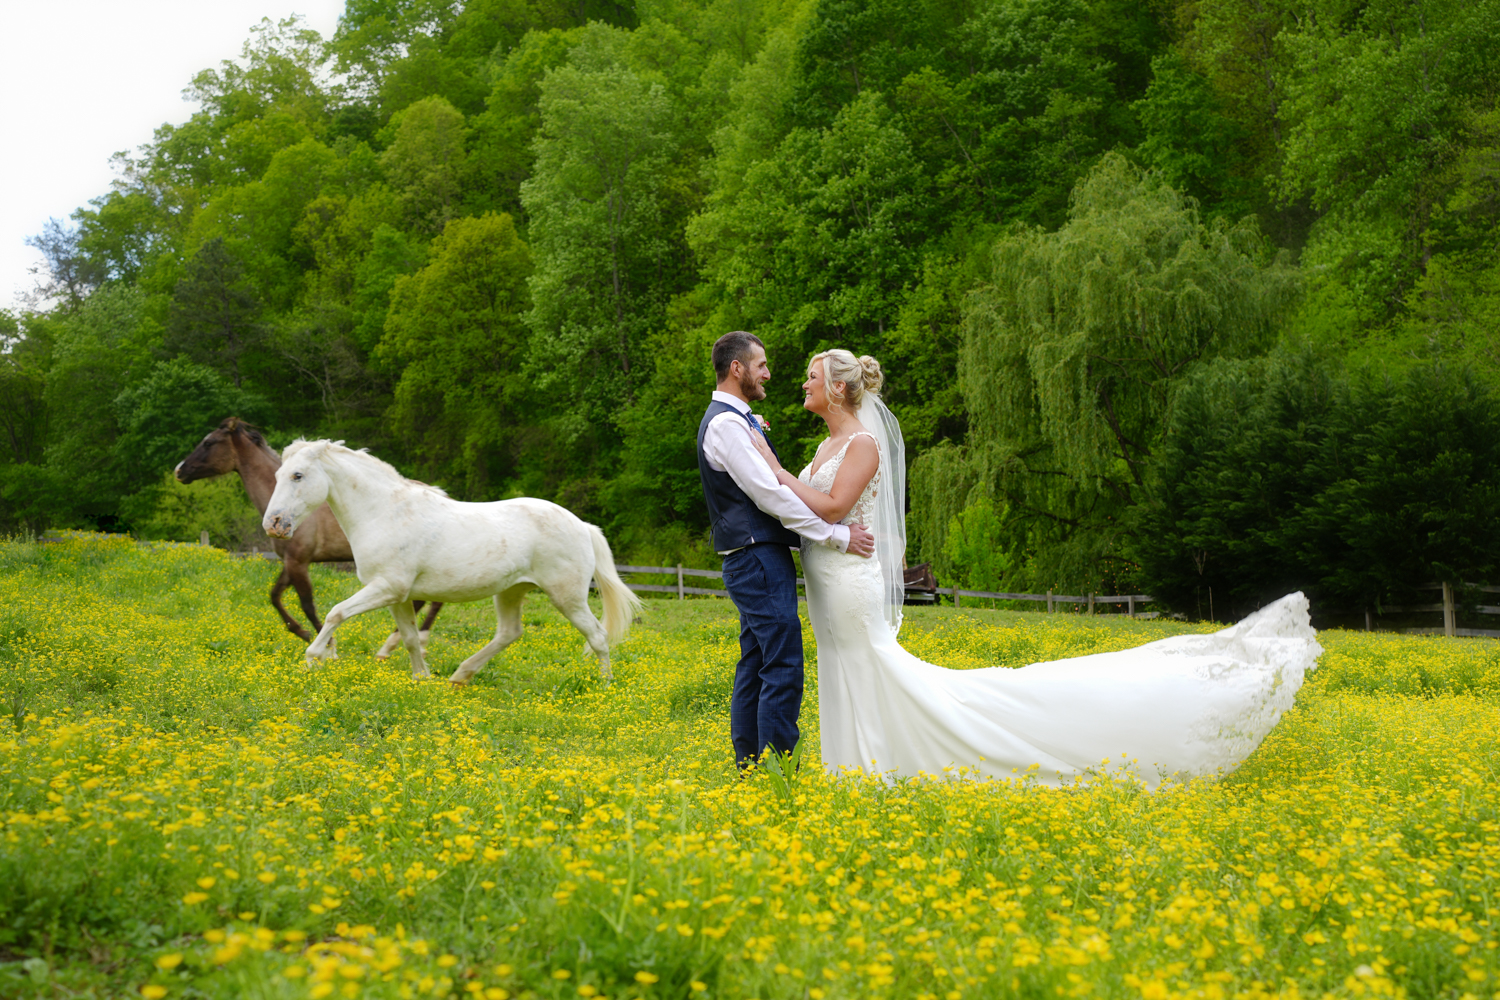 Wedding couple holding each other as the bride's train blows in the breeze and two horses run past them in a field of yellow buttercups at Honeysuckle Hills wedding venue in Pigeon Forge